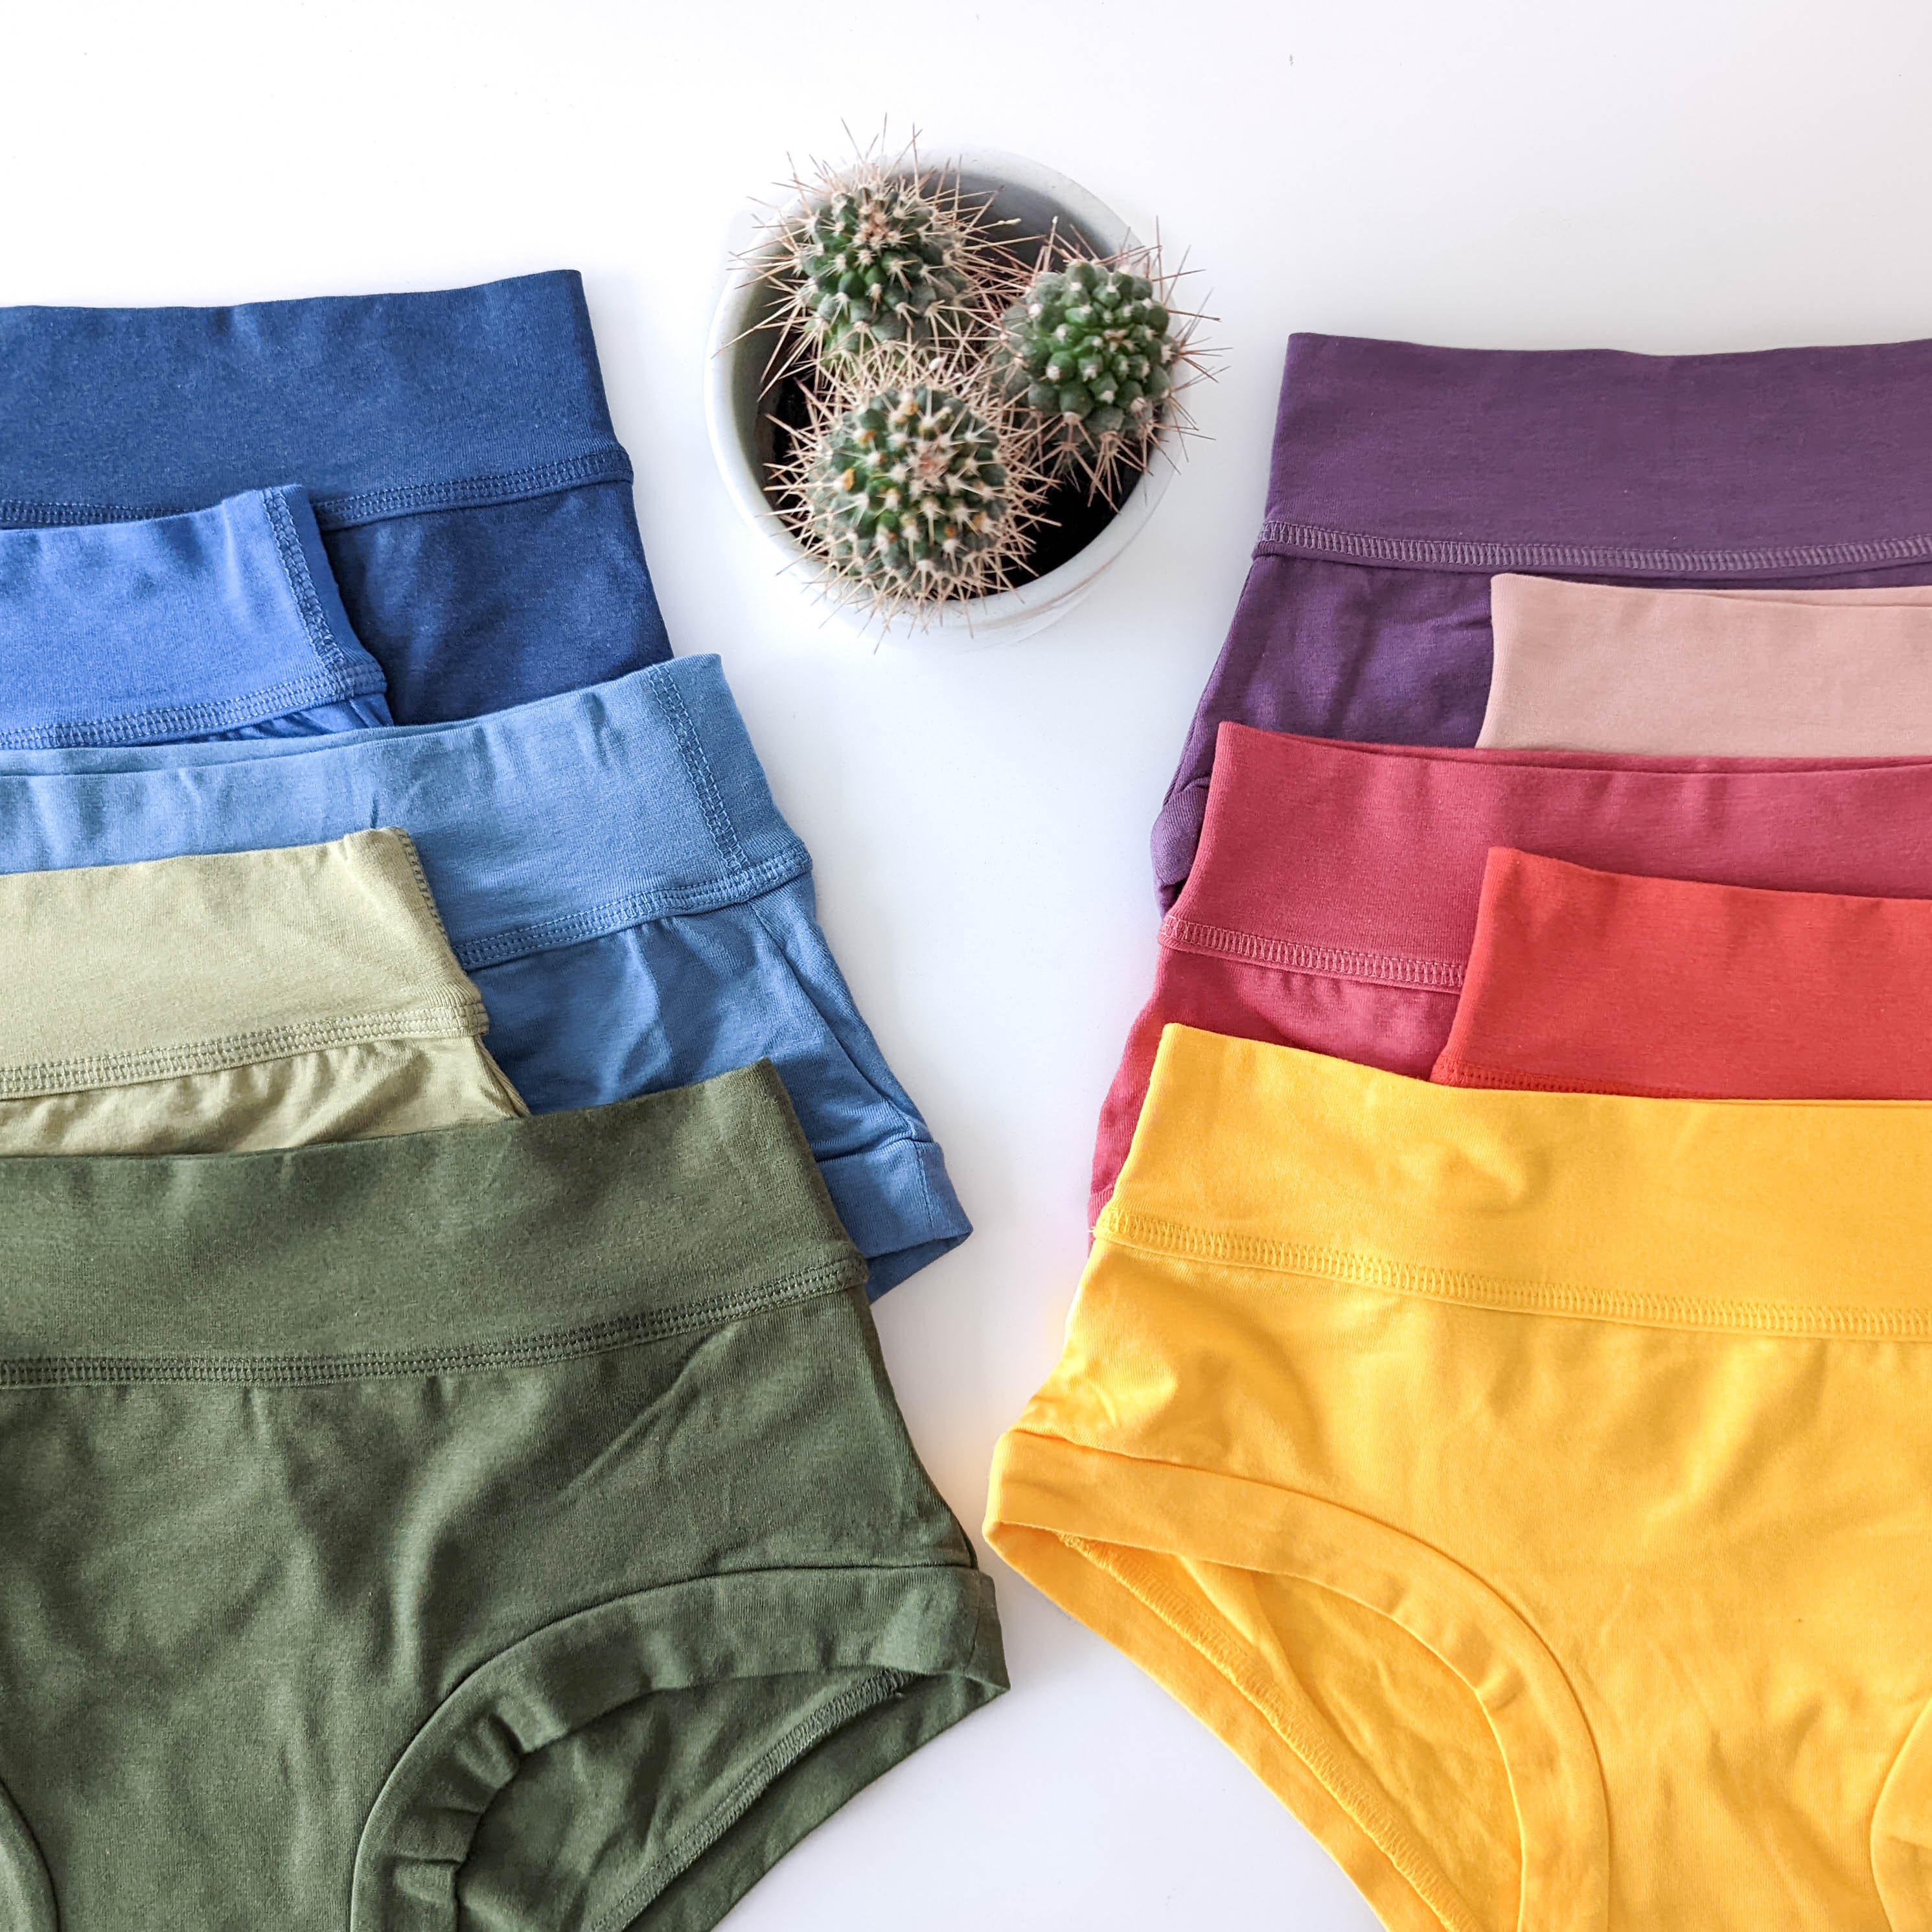 Rainbow Organic Cotton Underwear, Bamboo Lingerie, Elastic Free Panties,  Natural Briefs, Stretchy Comfortable Undies, Mid High Rise 